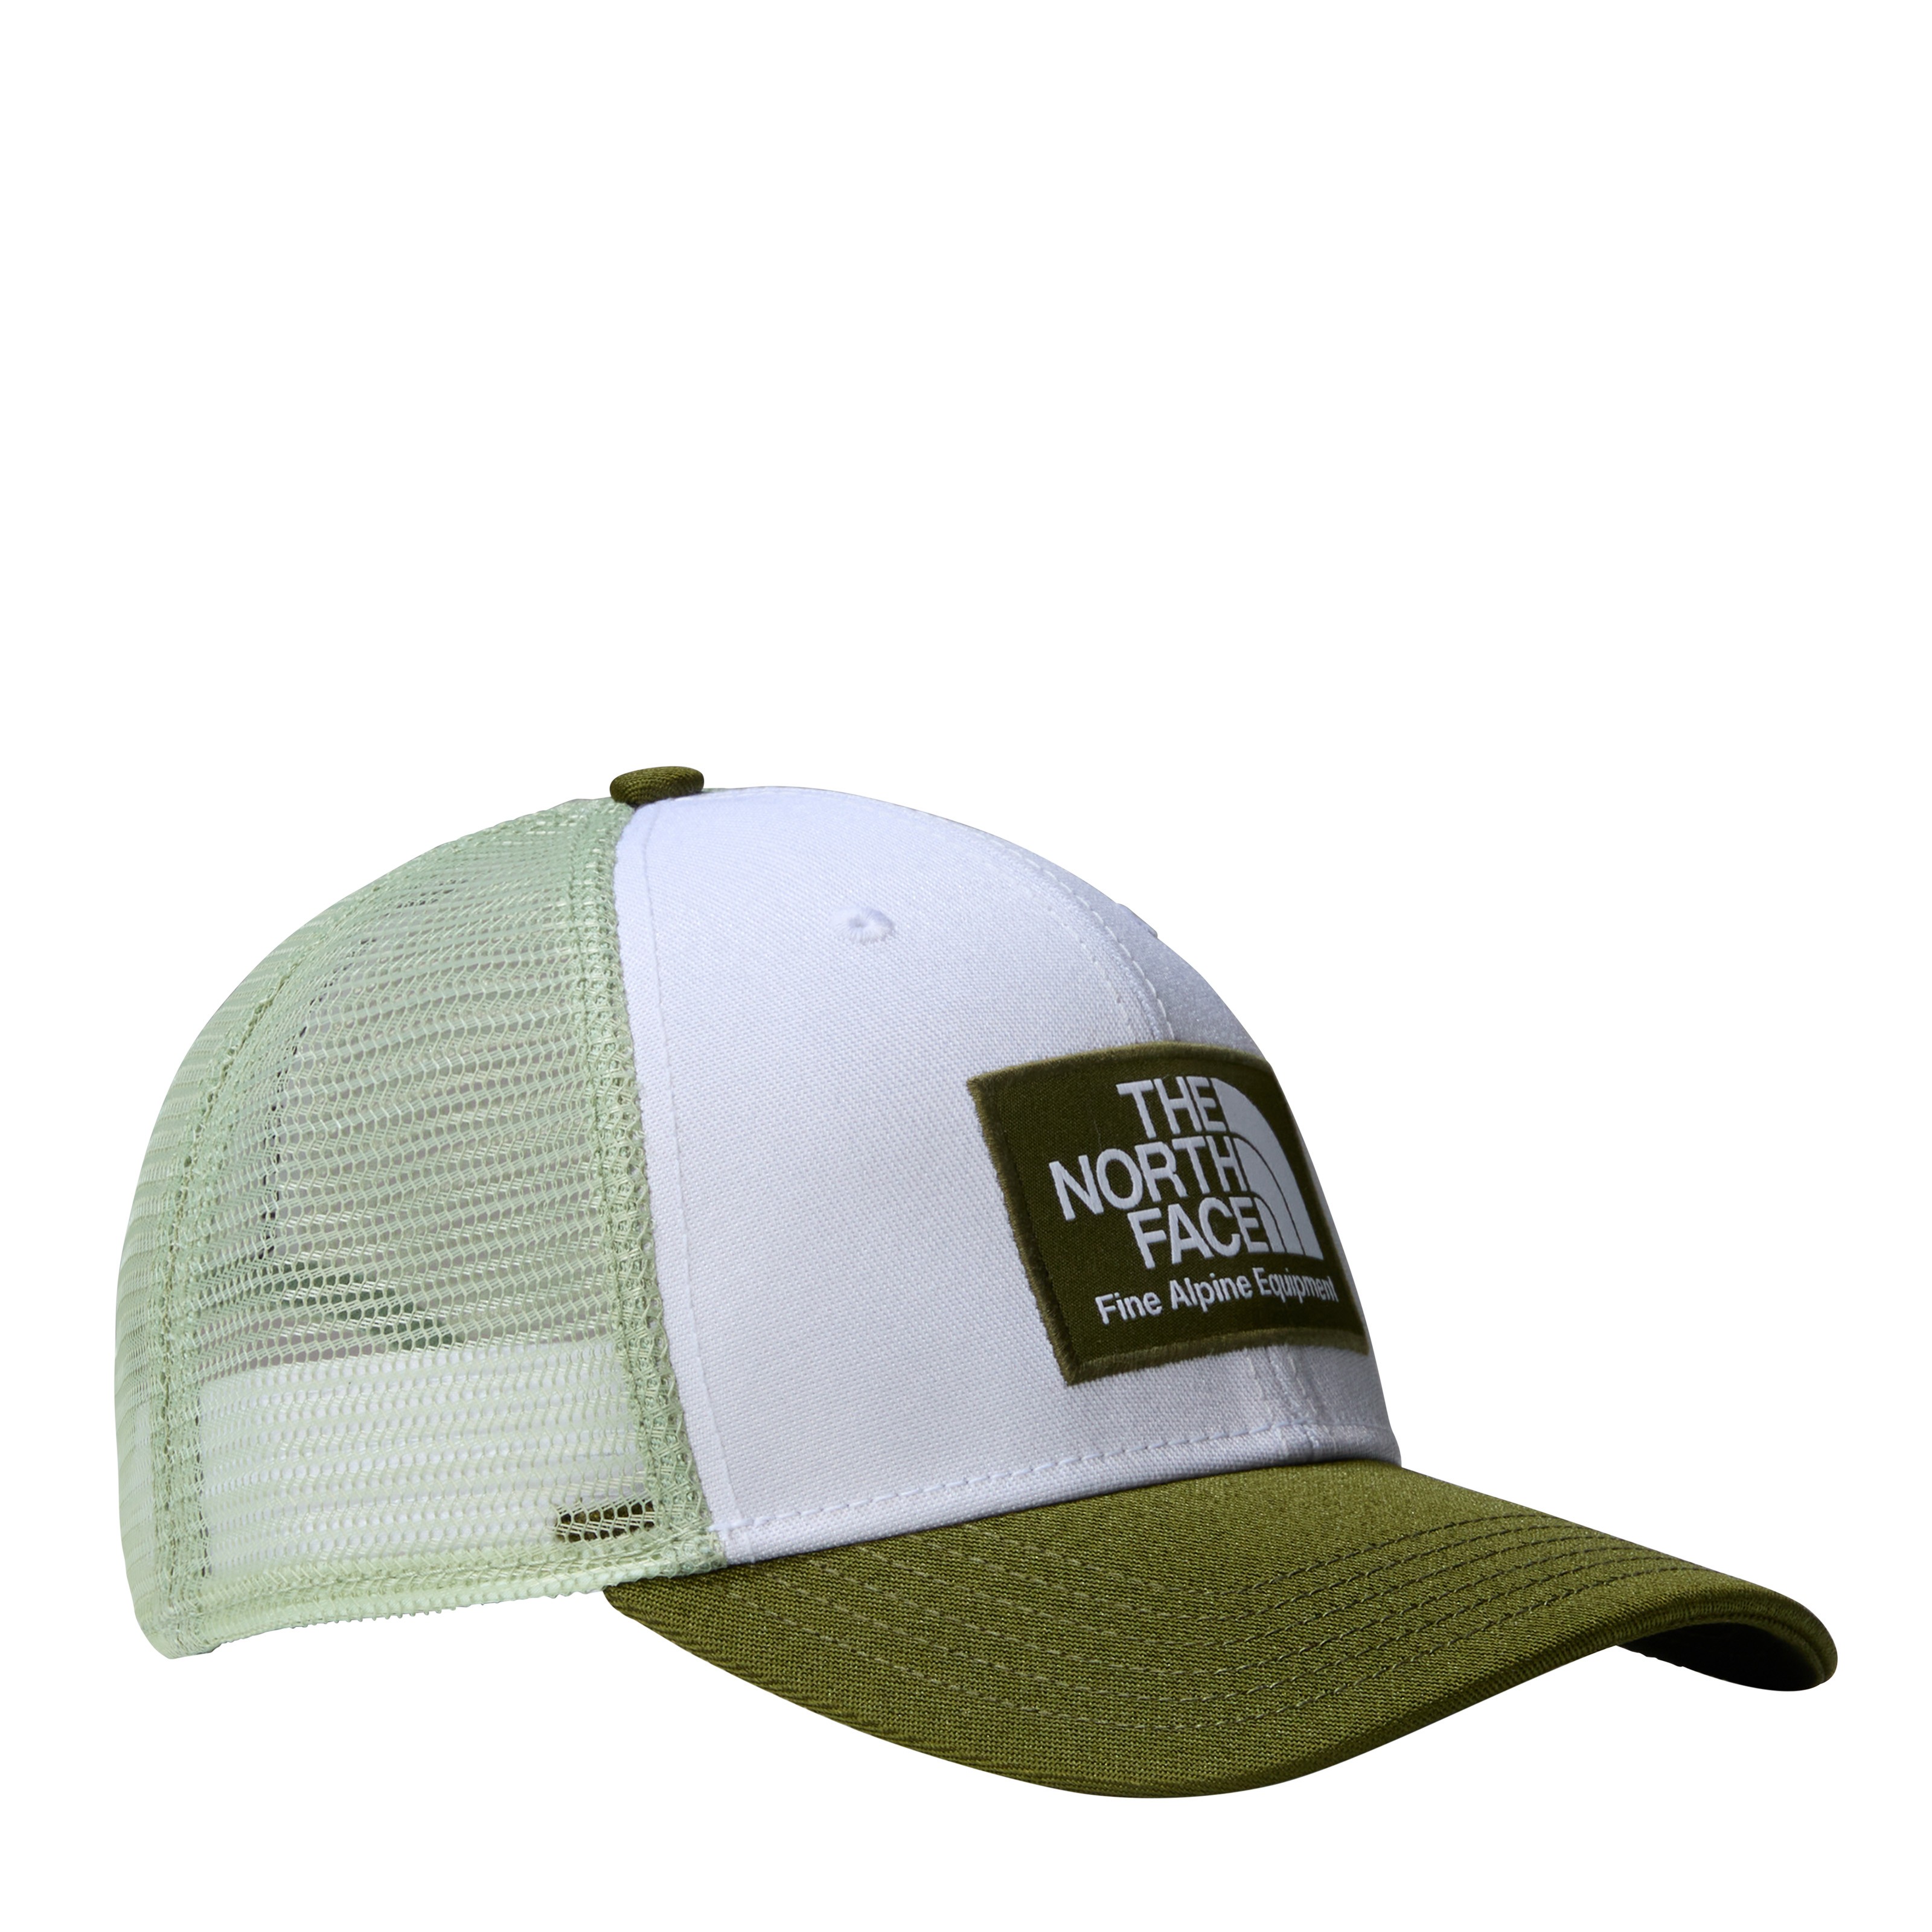 The North Face  Casquette Mudder Vert Olive